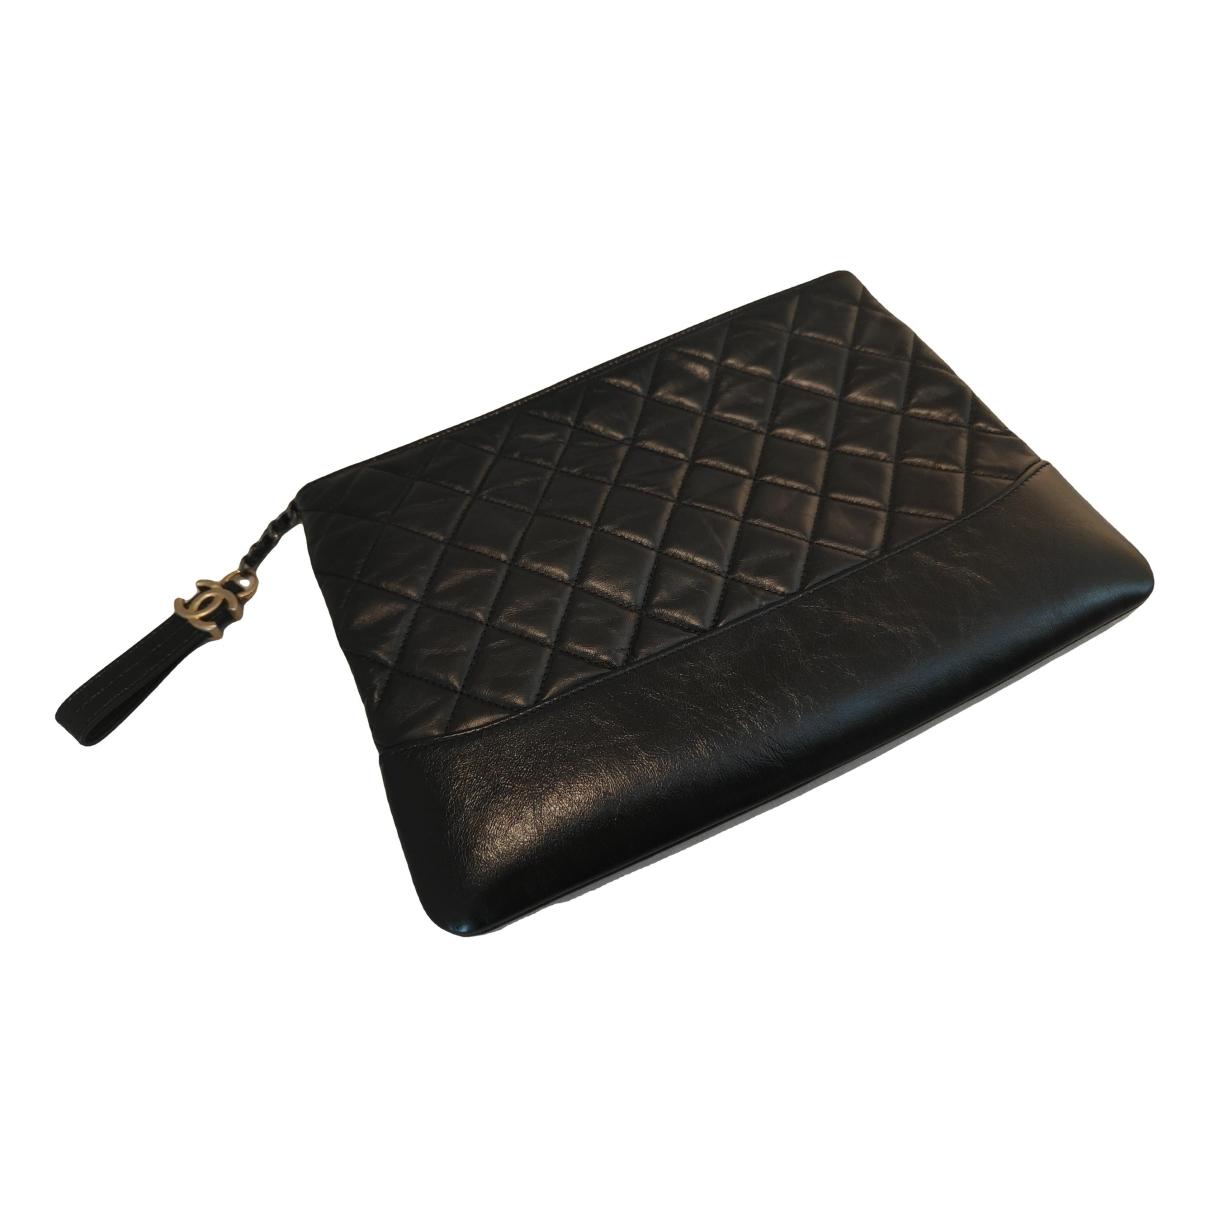 Timeless/classique leather clutch bag Chanel Black in Leather - 37359134